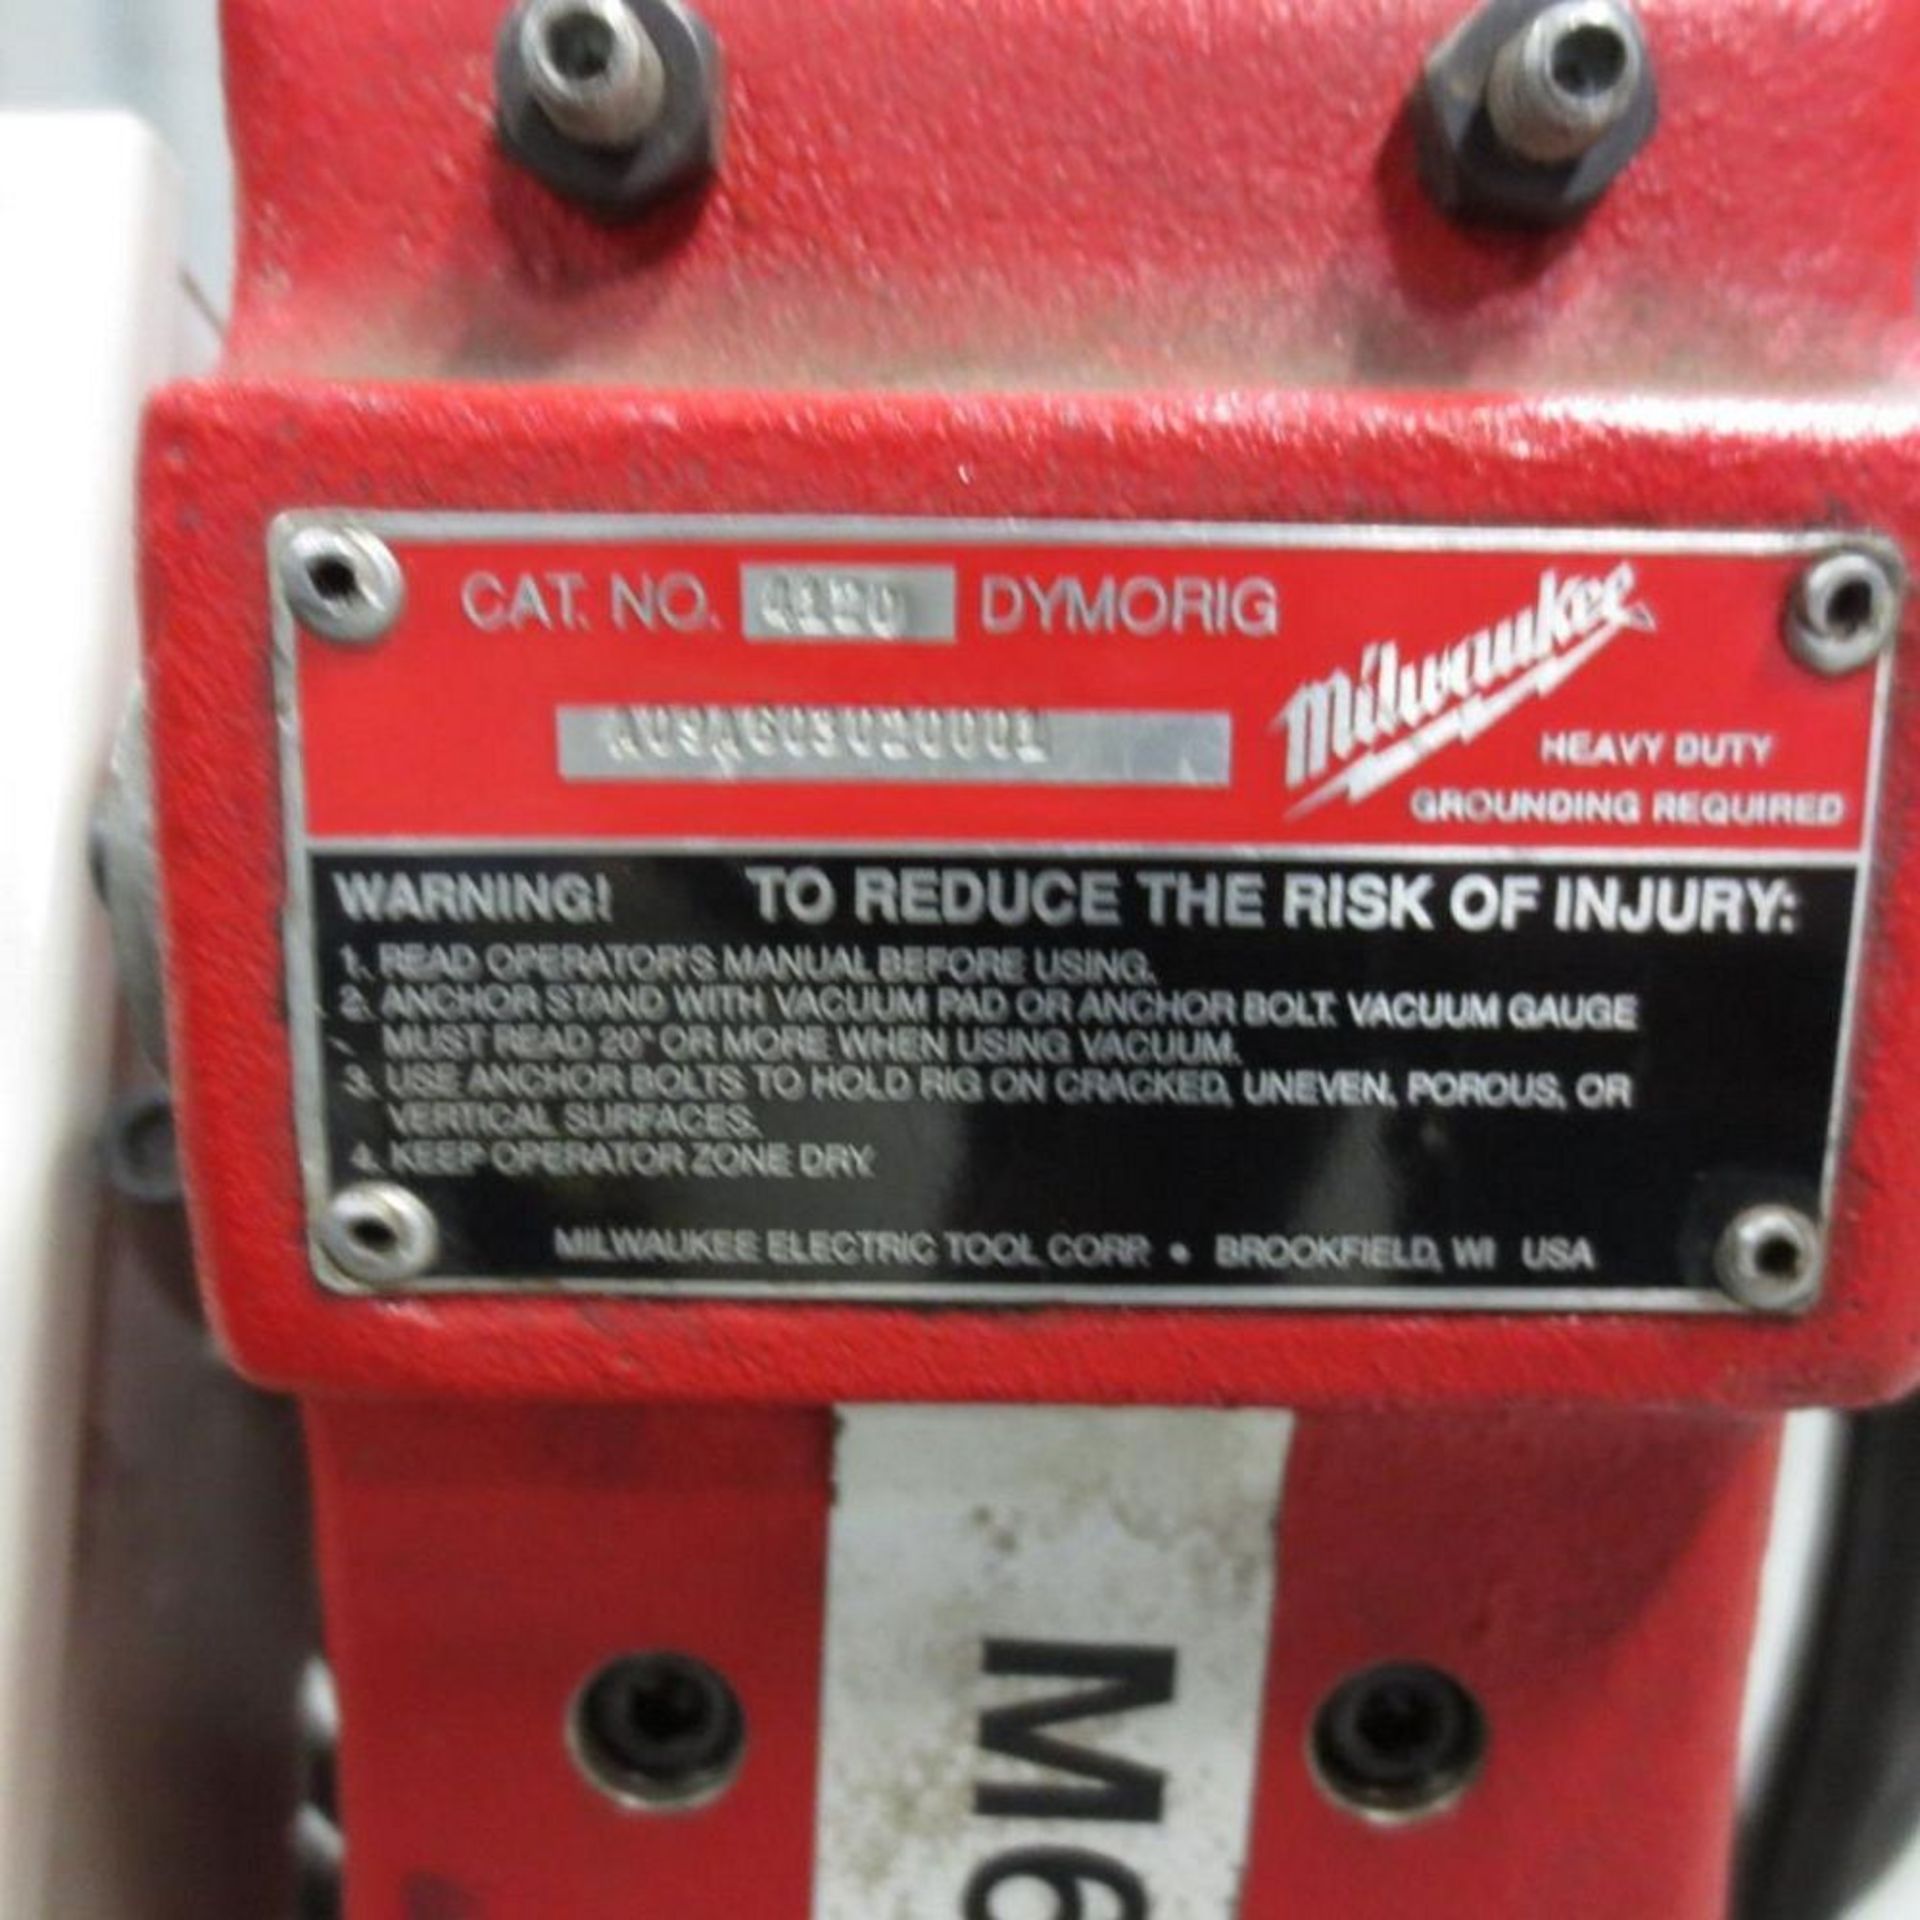 Milwaukee Dymadrill 2" To 10", 1- 1/4" - 7 Spindle Thread, 20 Amp, 120V - Image 5 of 7